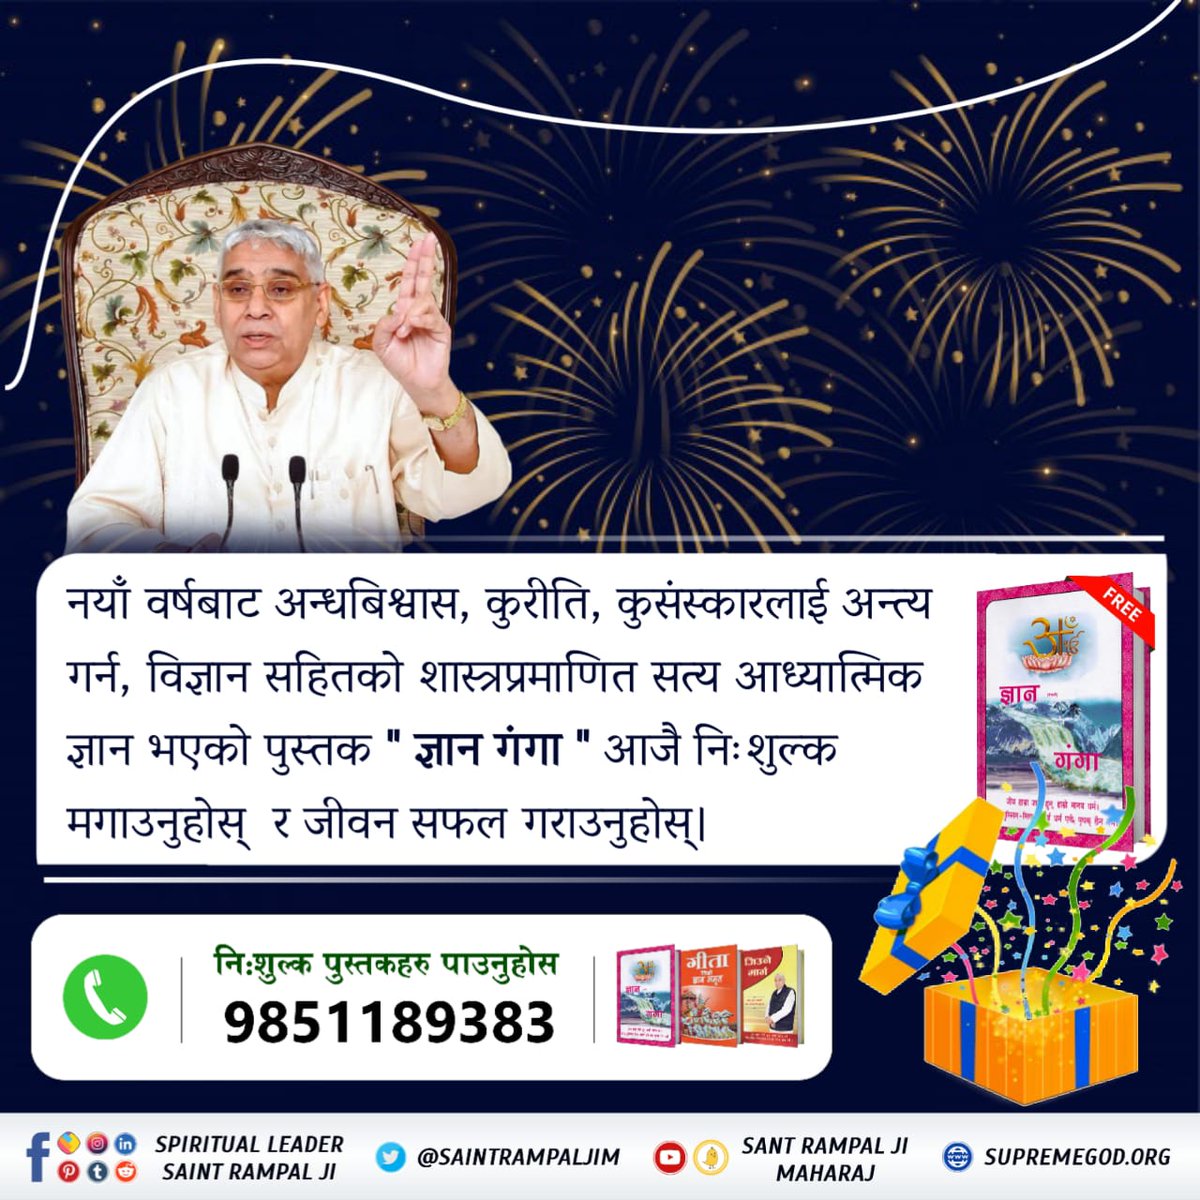 #नयाँवर्षमा_जीवनको_नयाँयात्रा In the new year, end the blind beliefs, bad customs and bad habits, get the book 'Gyan Ganga' which is the true spiritual knowledge proved by scriptures along with science, free of cost and make your life successful. #GodMorningMonday